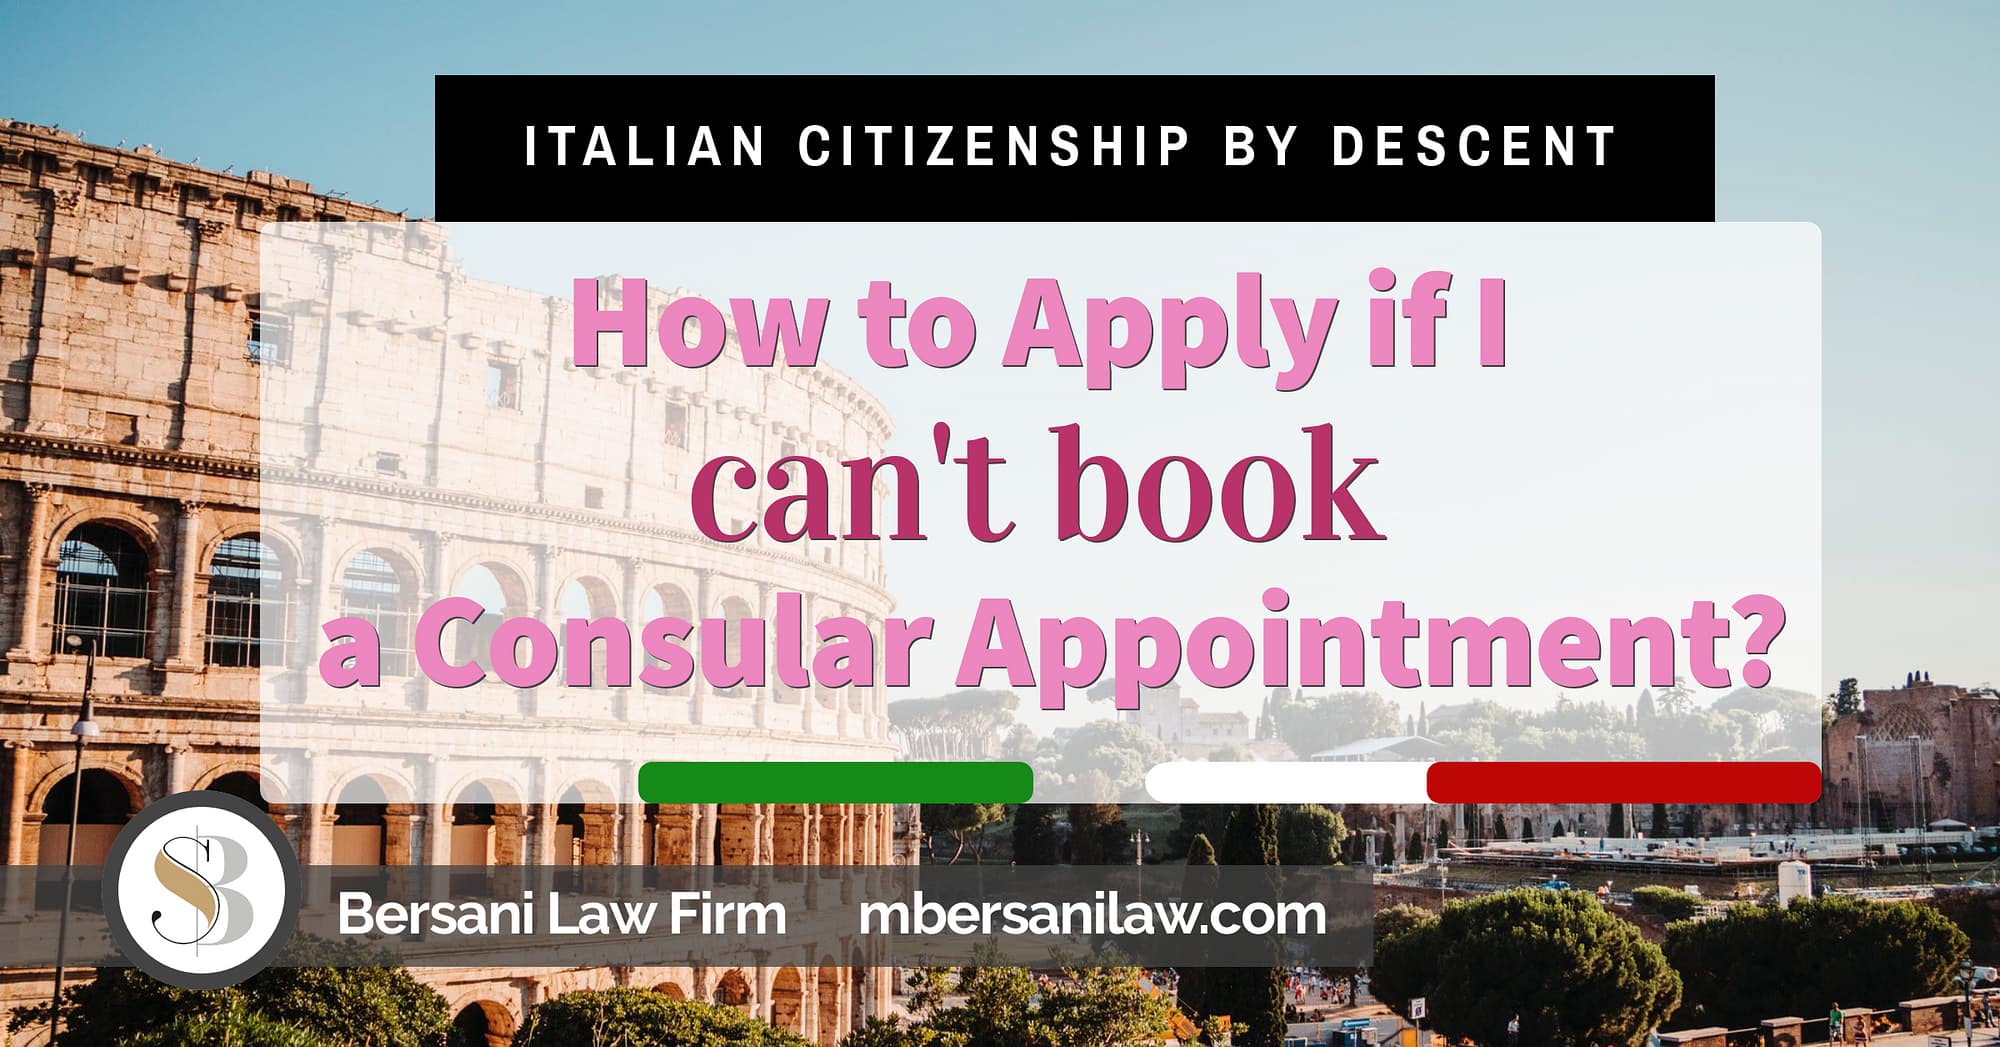 How to Apply for Italian Citizenship by Descent if I can’t book an appointment at the Italian Consulate?